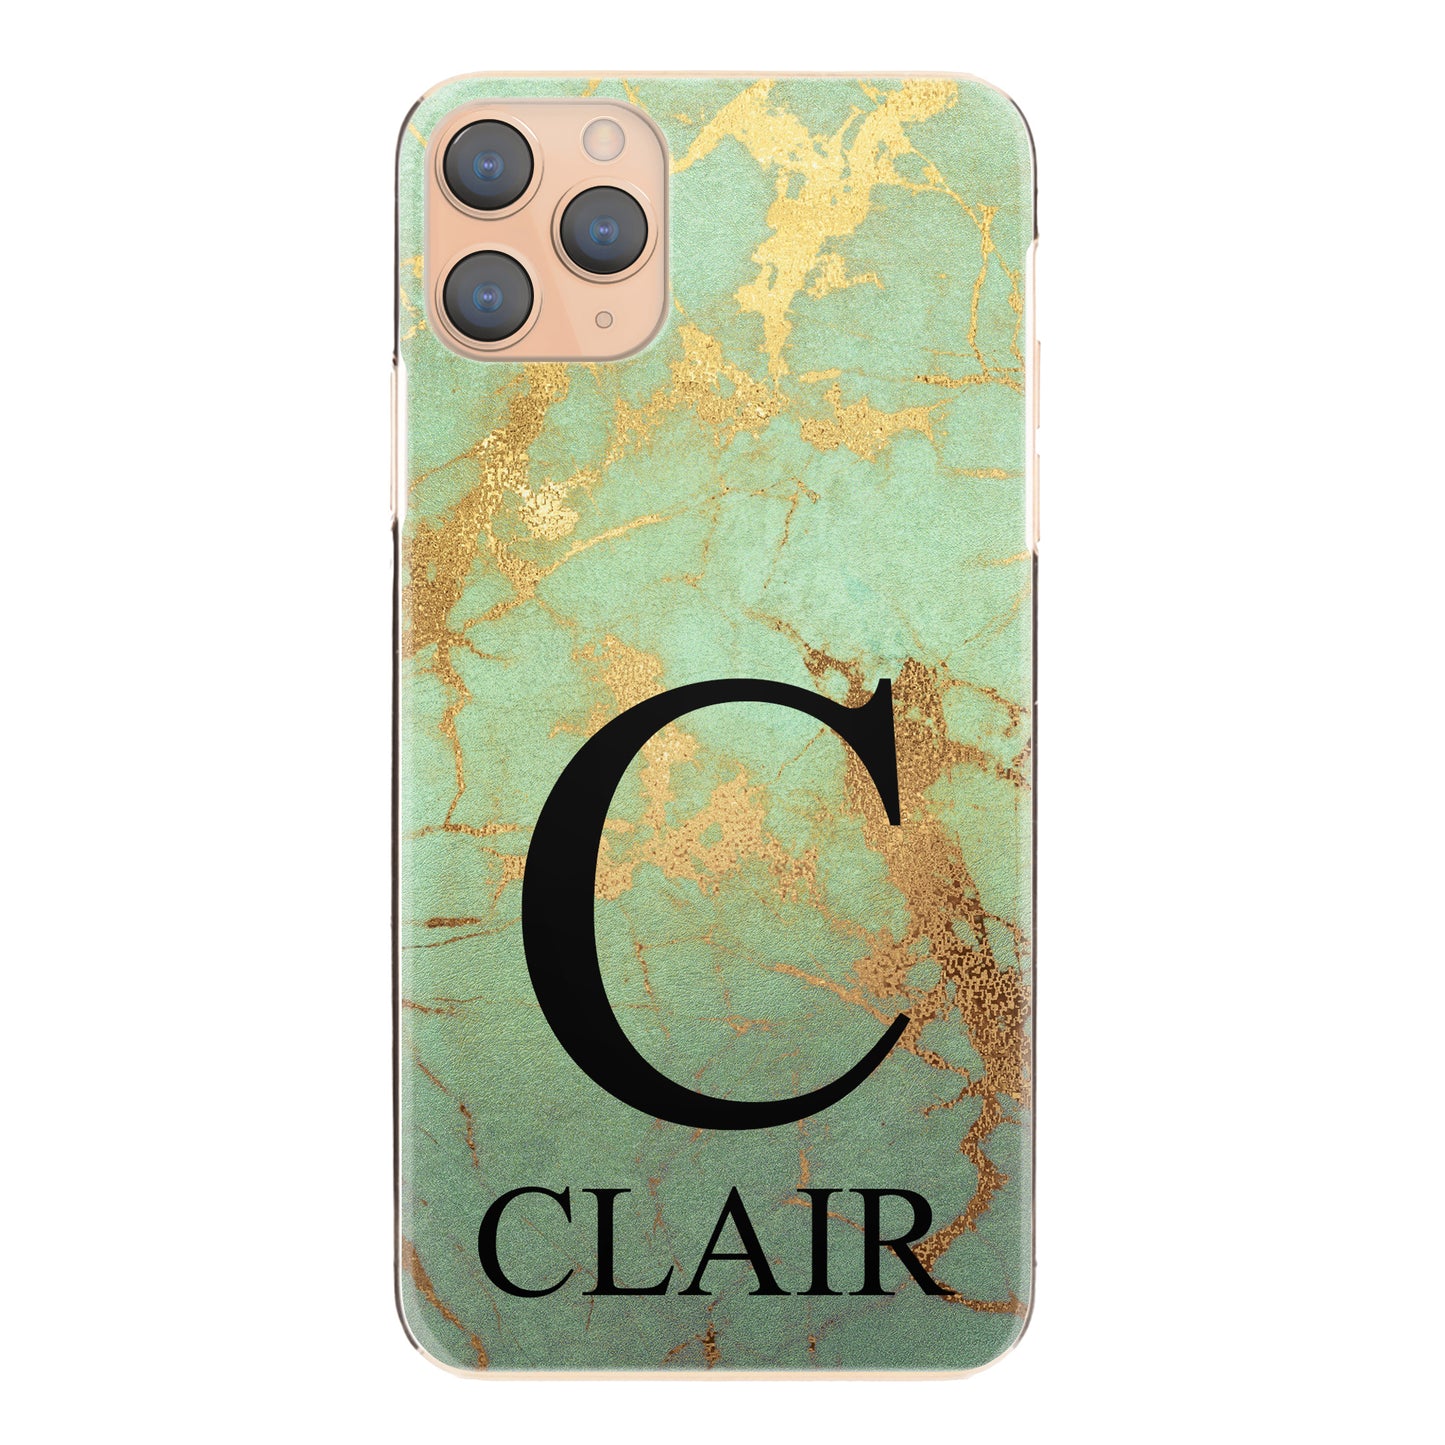 Personalised Oppo Phone Hard Case with Monogram and Text on Gold Infused Green Marble